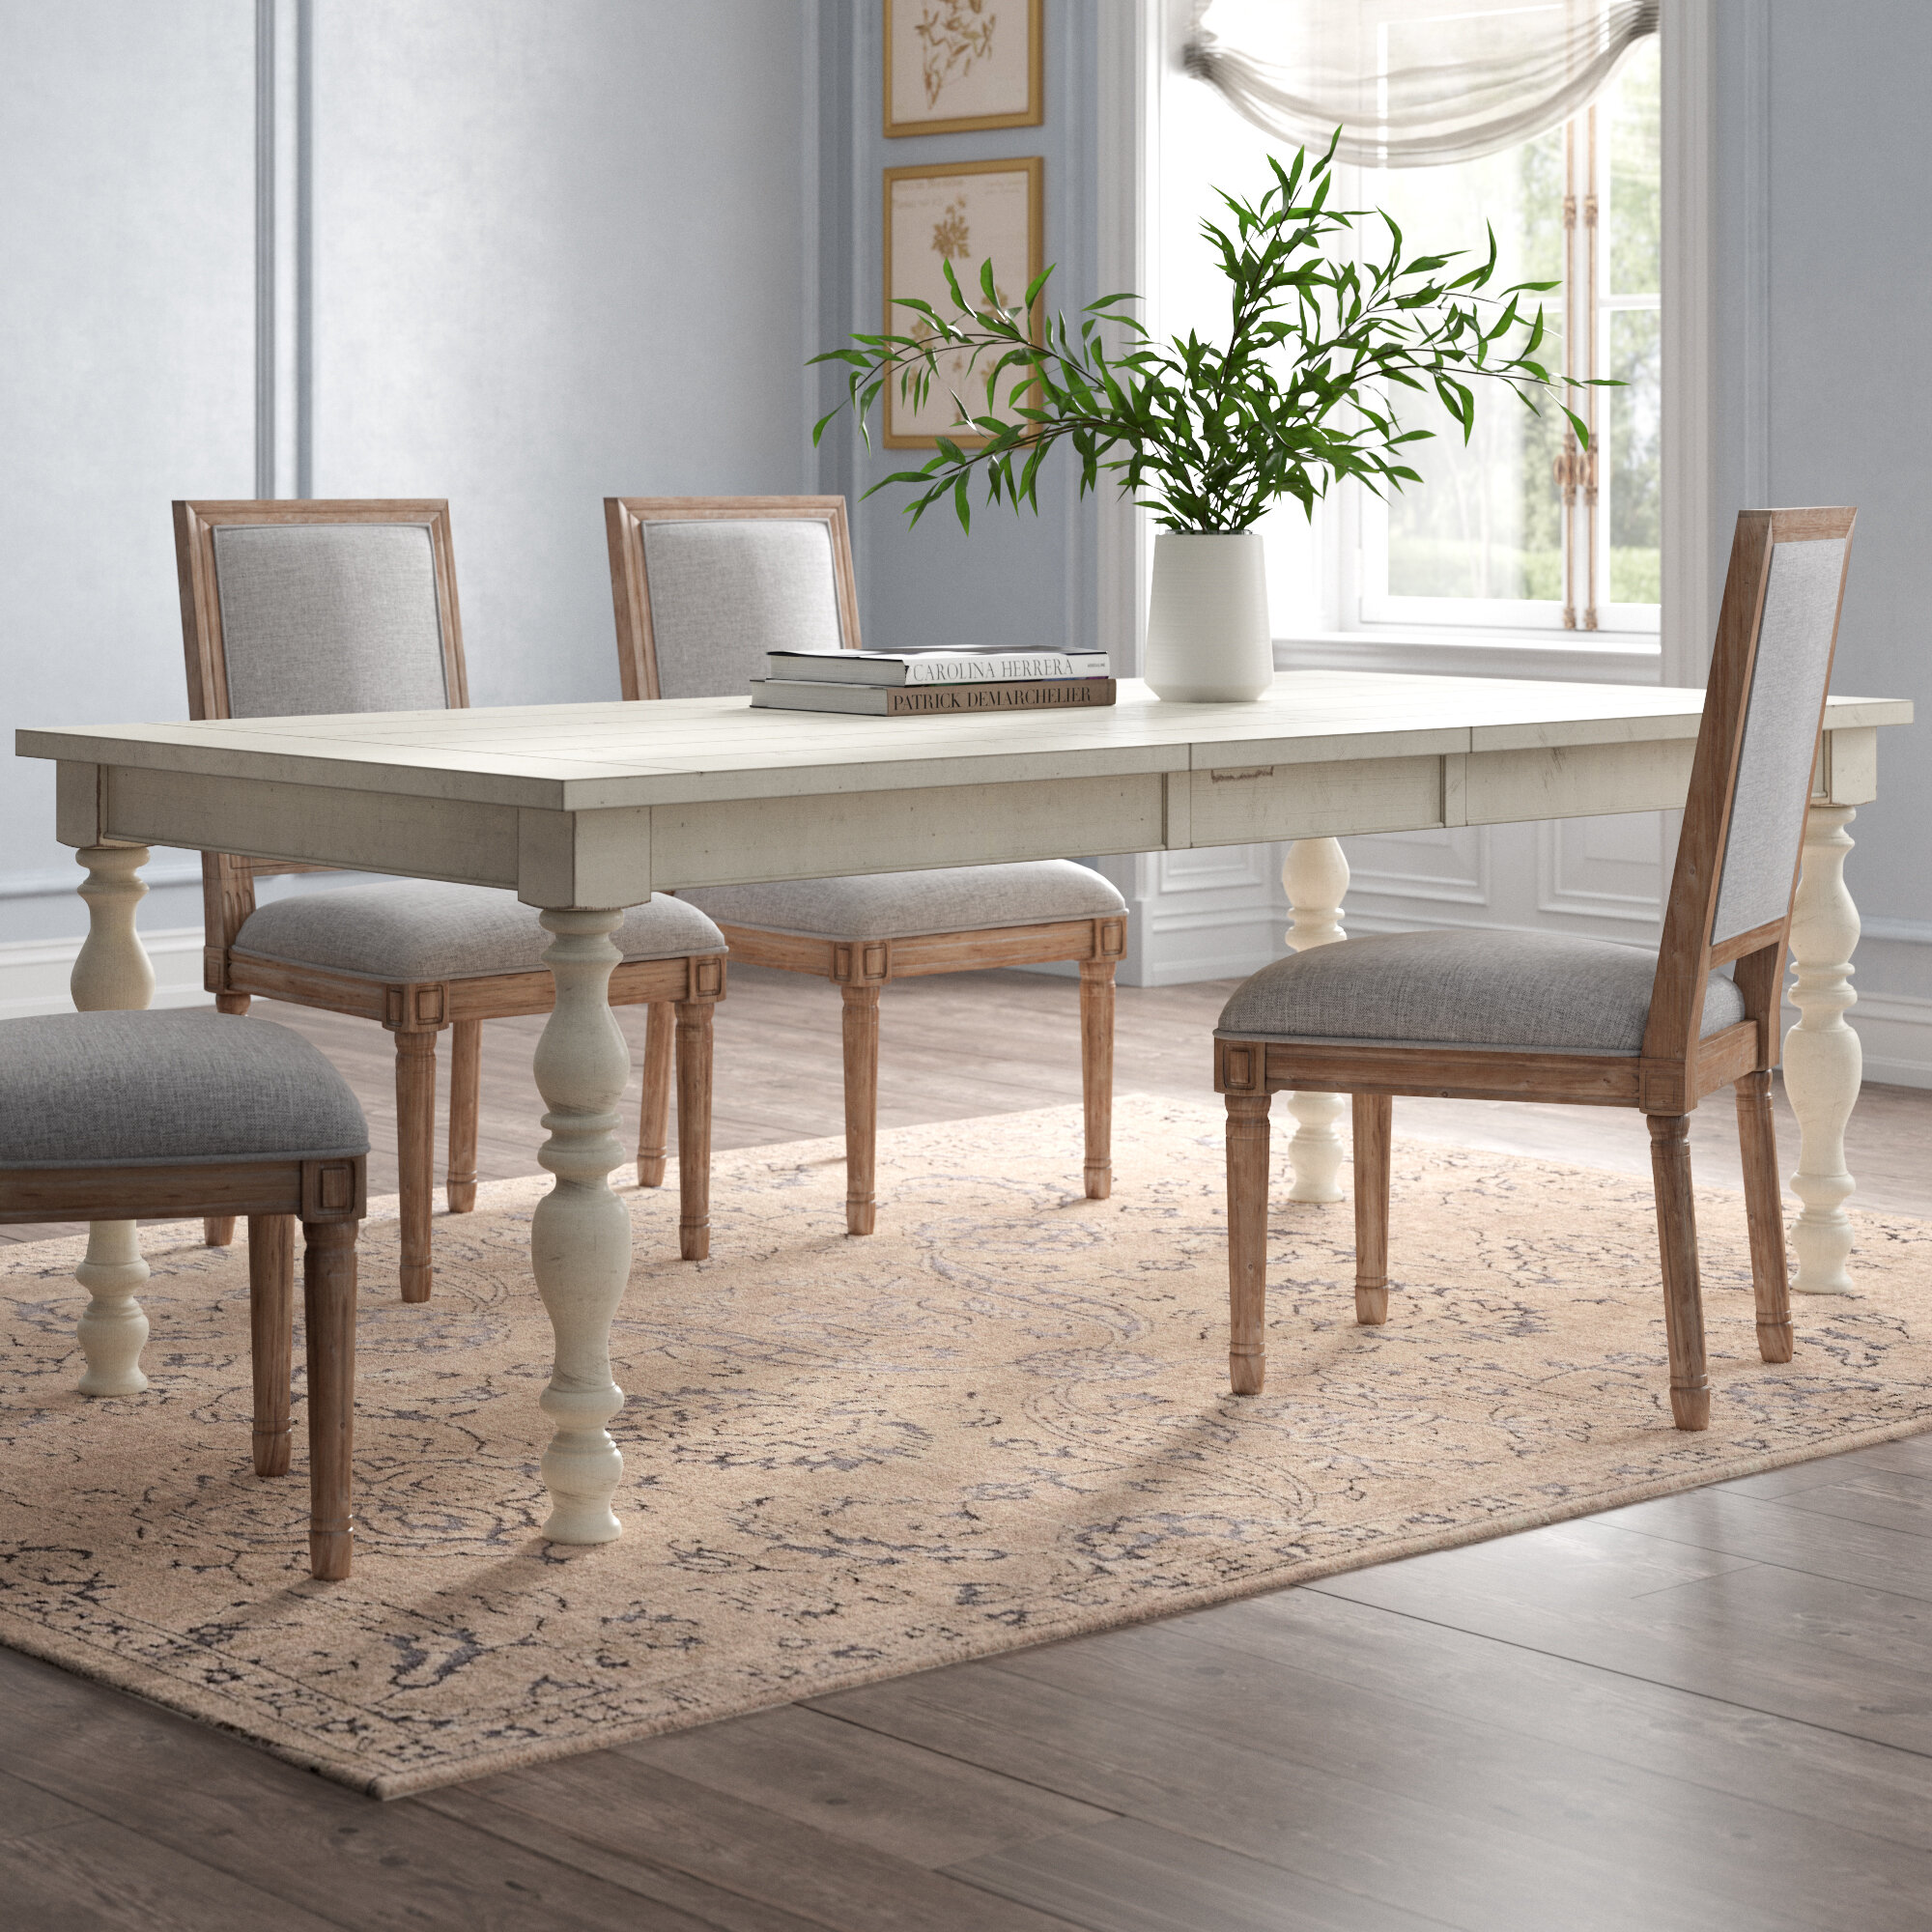 6 Seat Extendable Kitchen Dining Tables You Ll Love In 2021 Wayfair